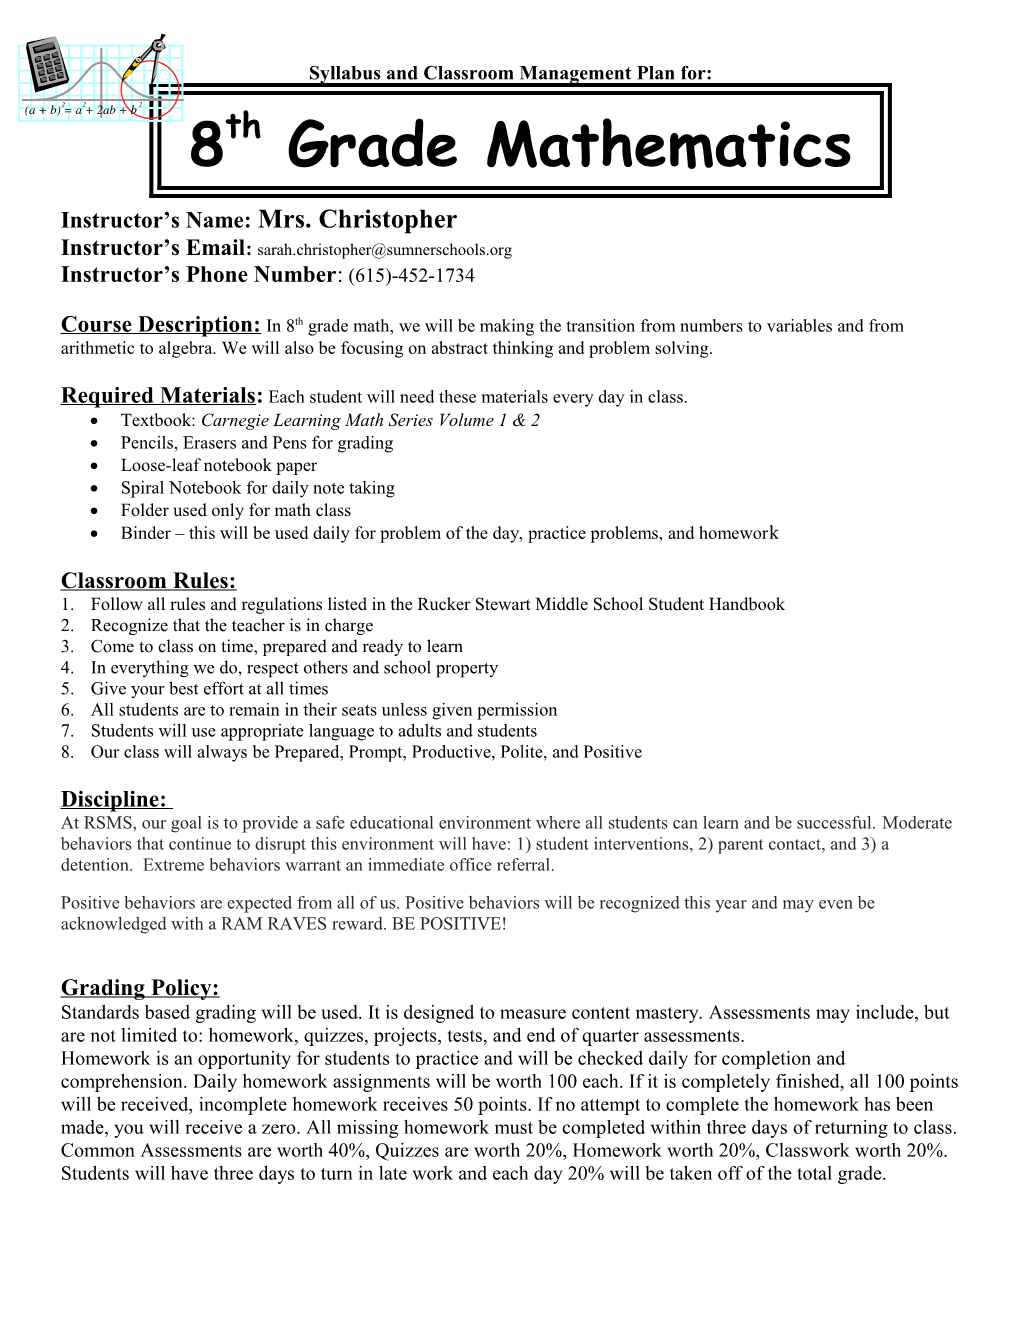 Syllabus and Classroom Management Plan for 8Th Grade Pre-Algebra